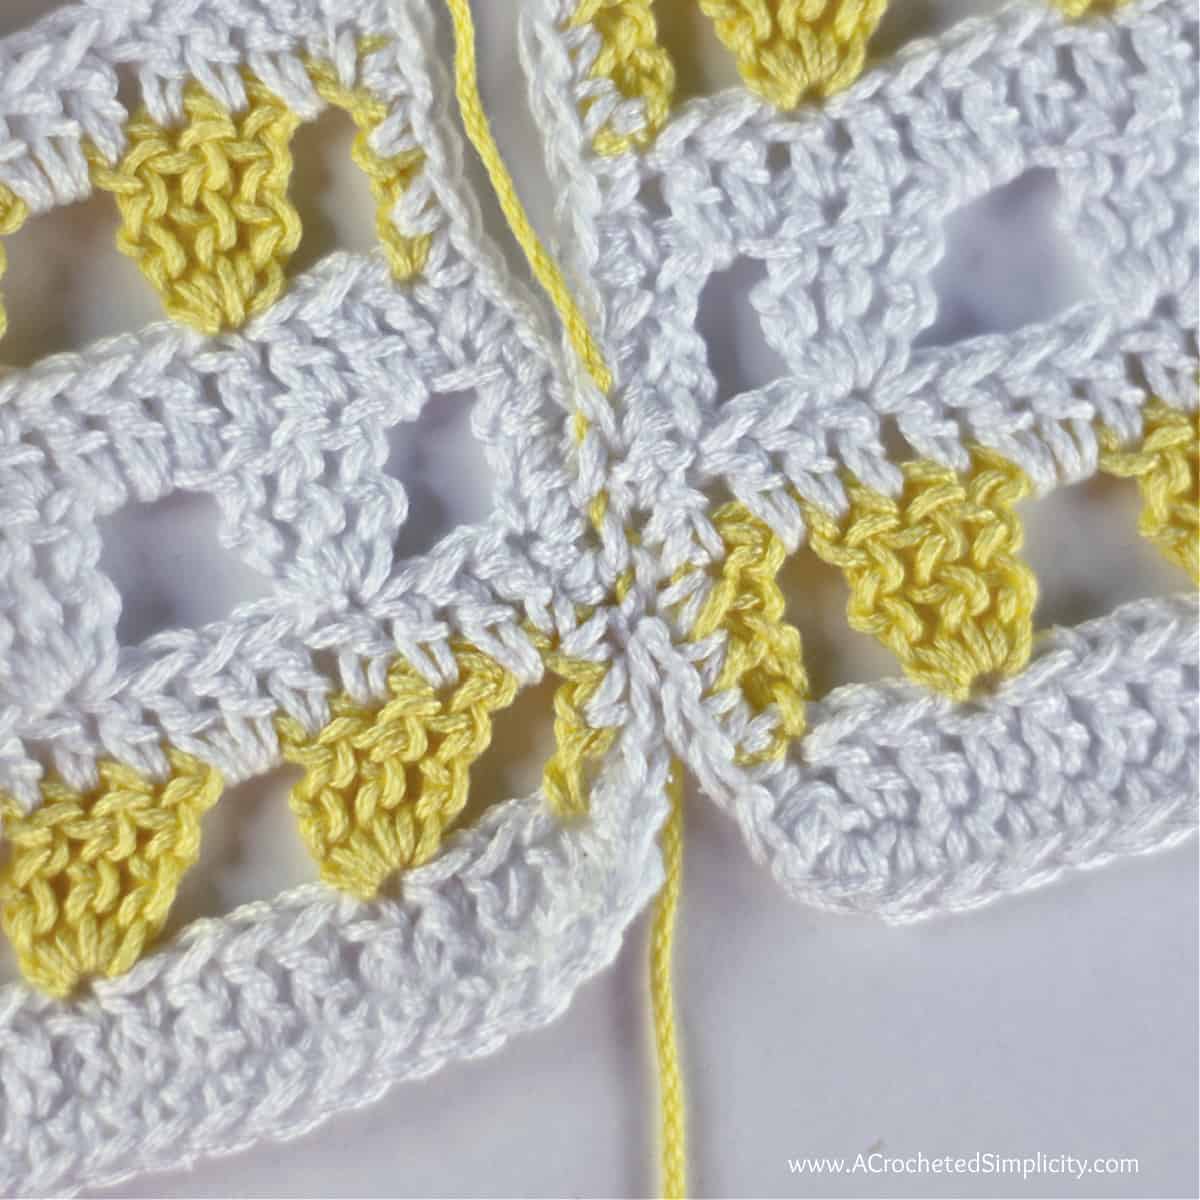 The yellow yarn is pulled on both ends to close the mattress stitch seam.